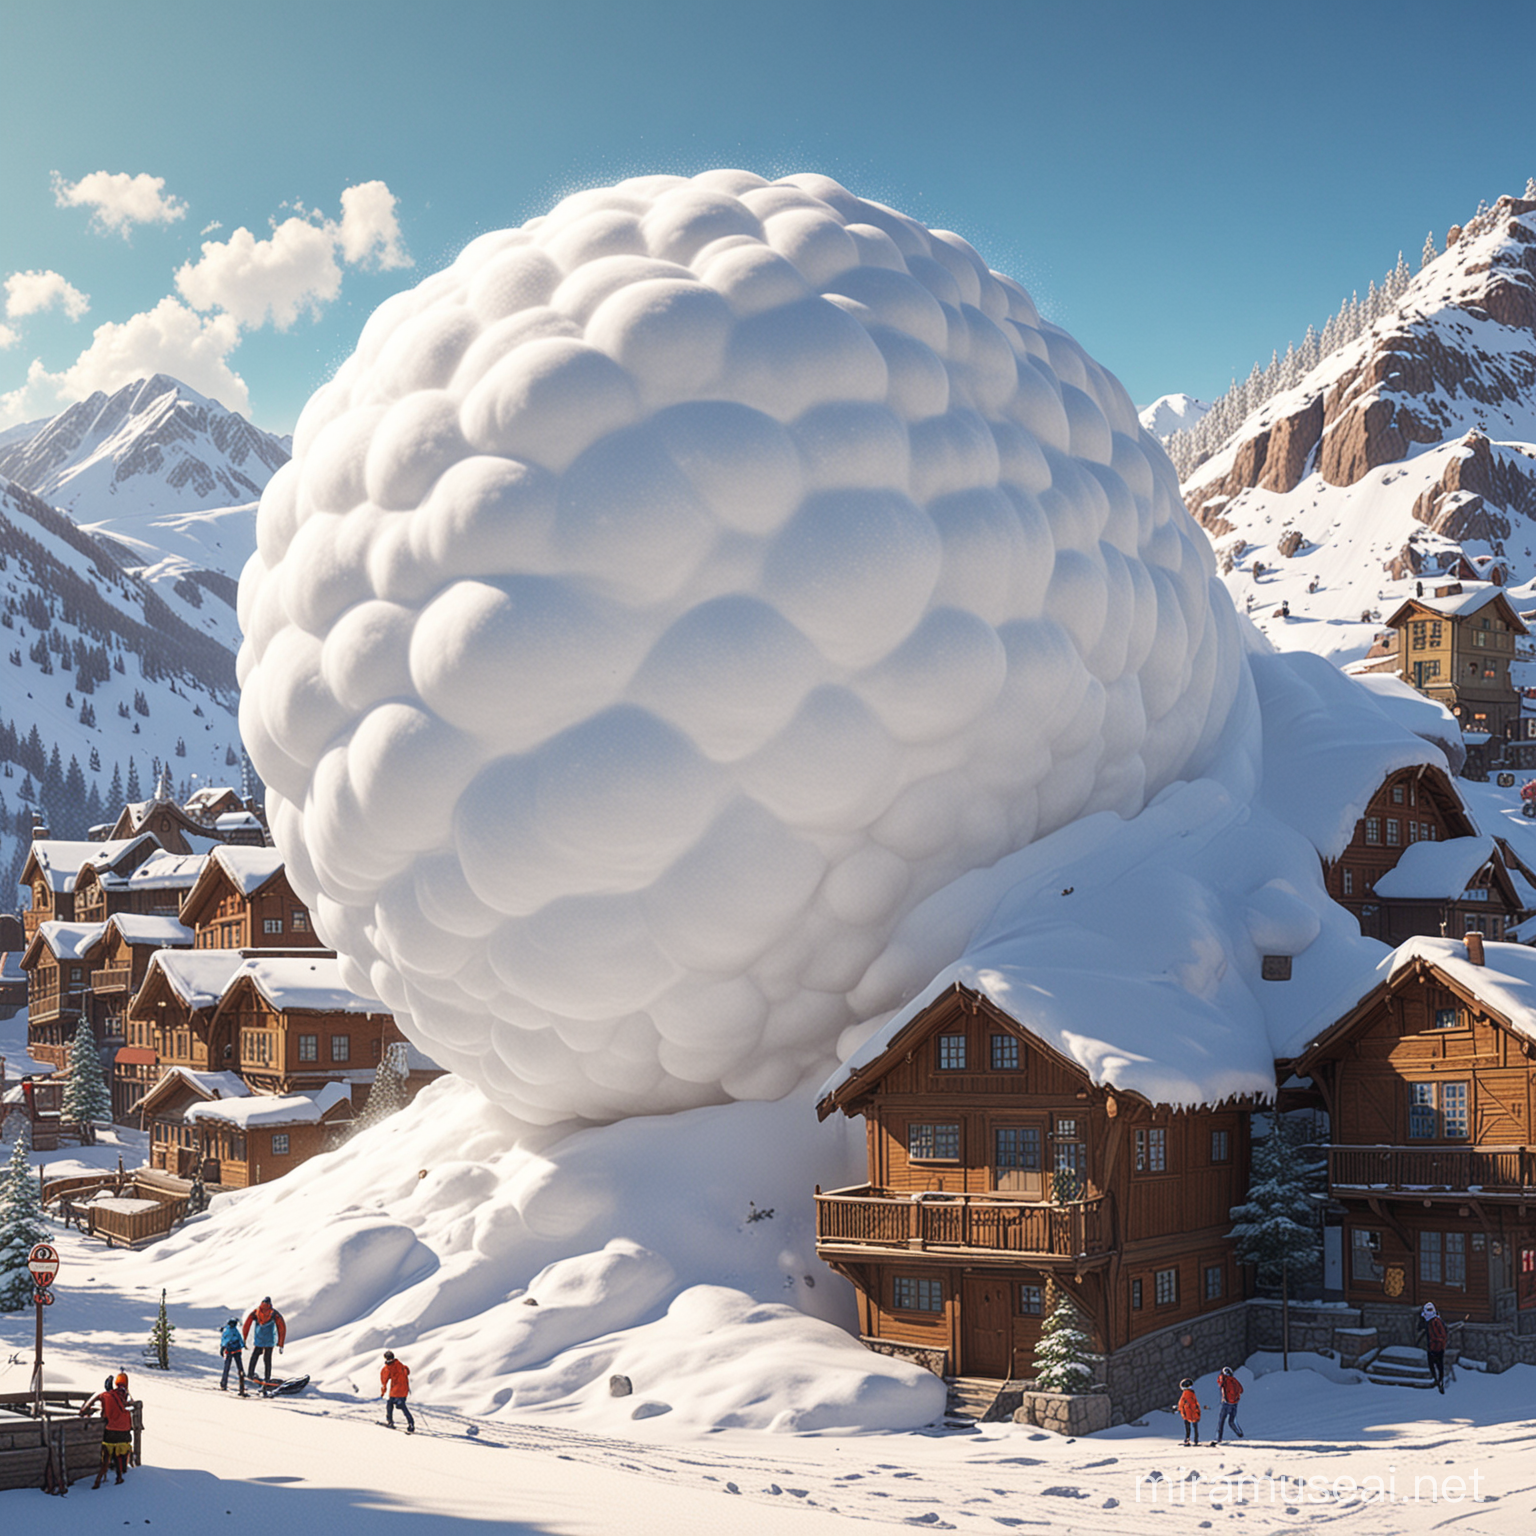 A cartoon scene of a giant snowball rolling from the top of a snow covered mountain into a Ski village resort below